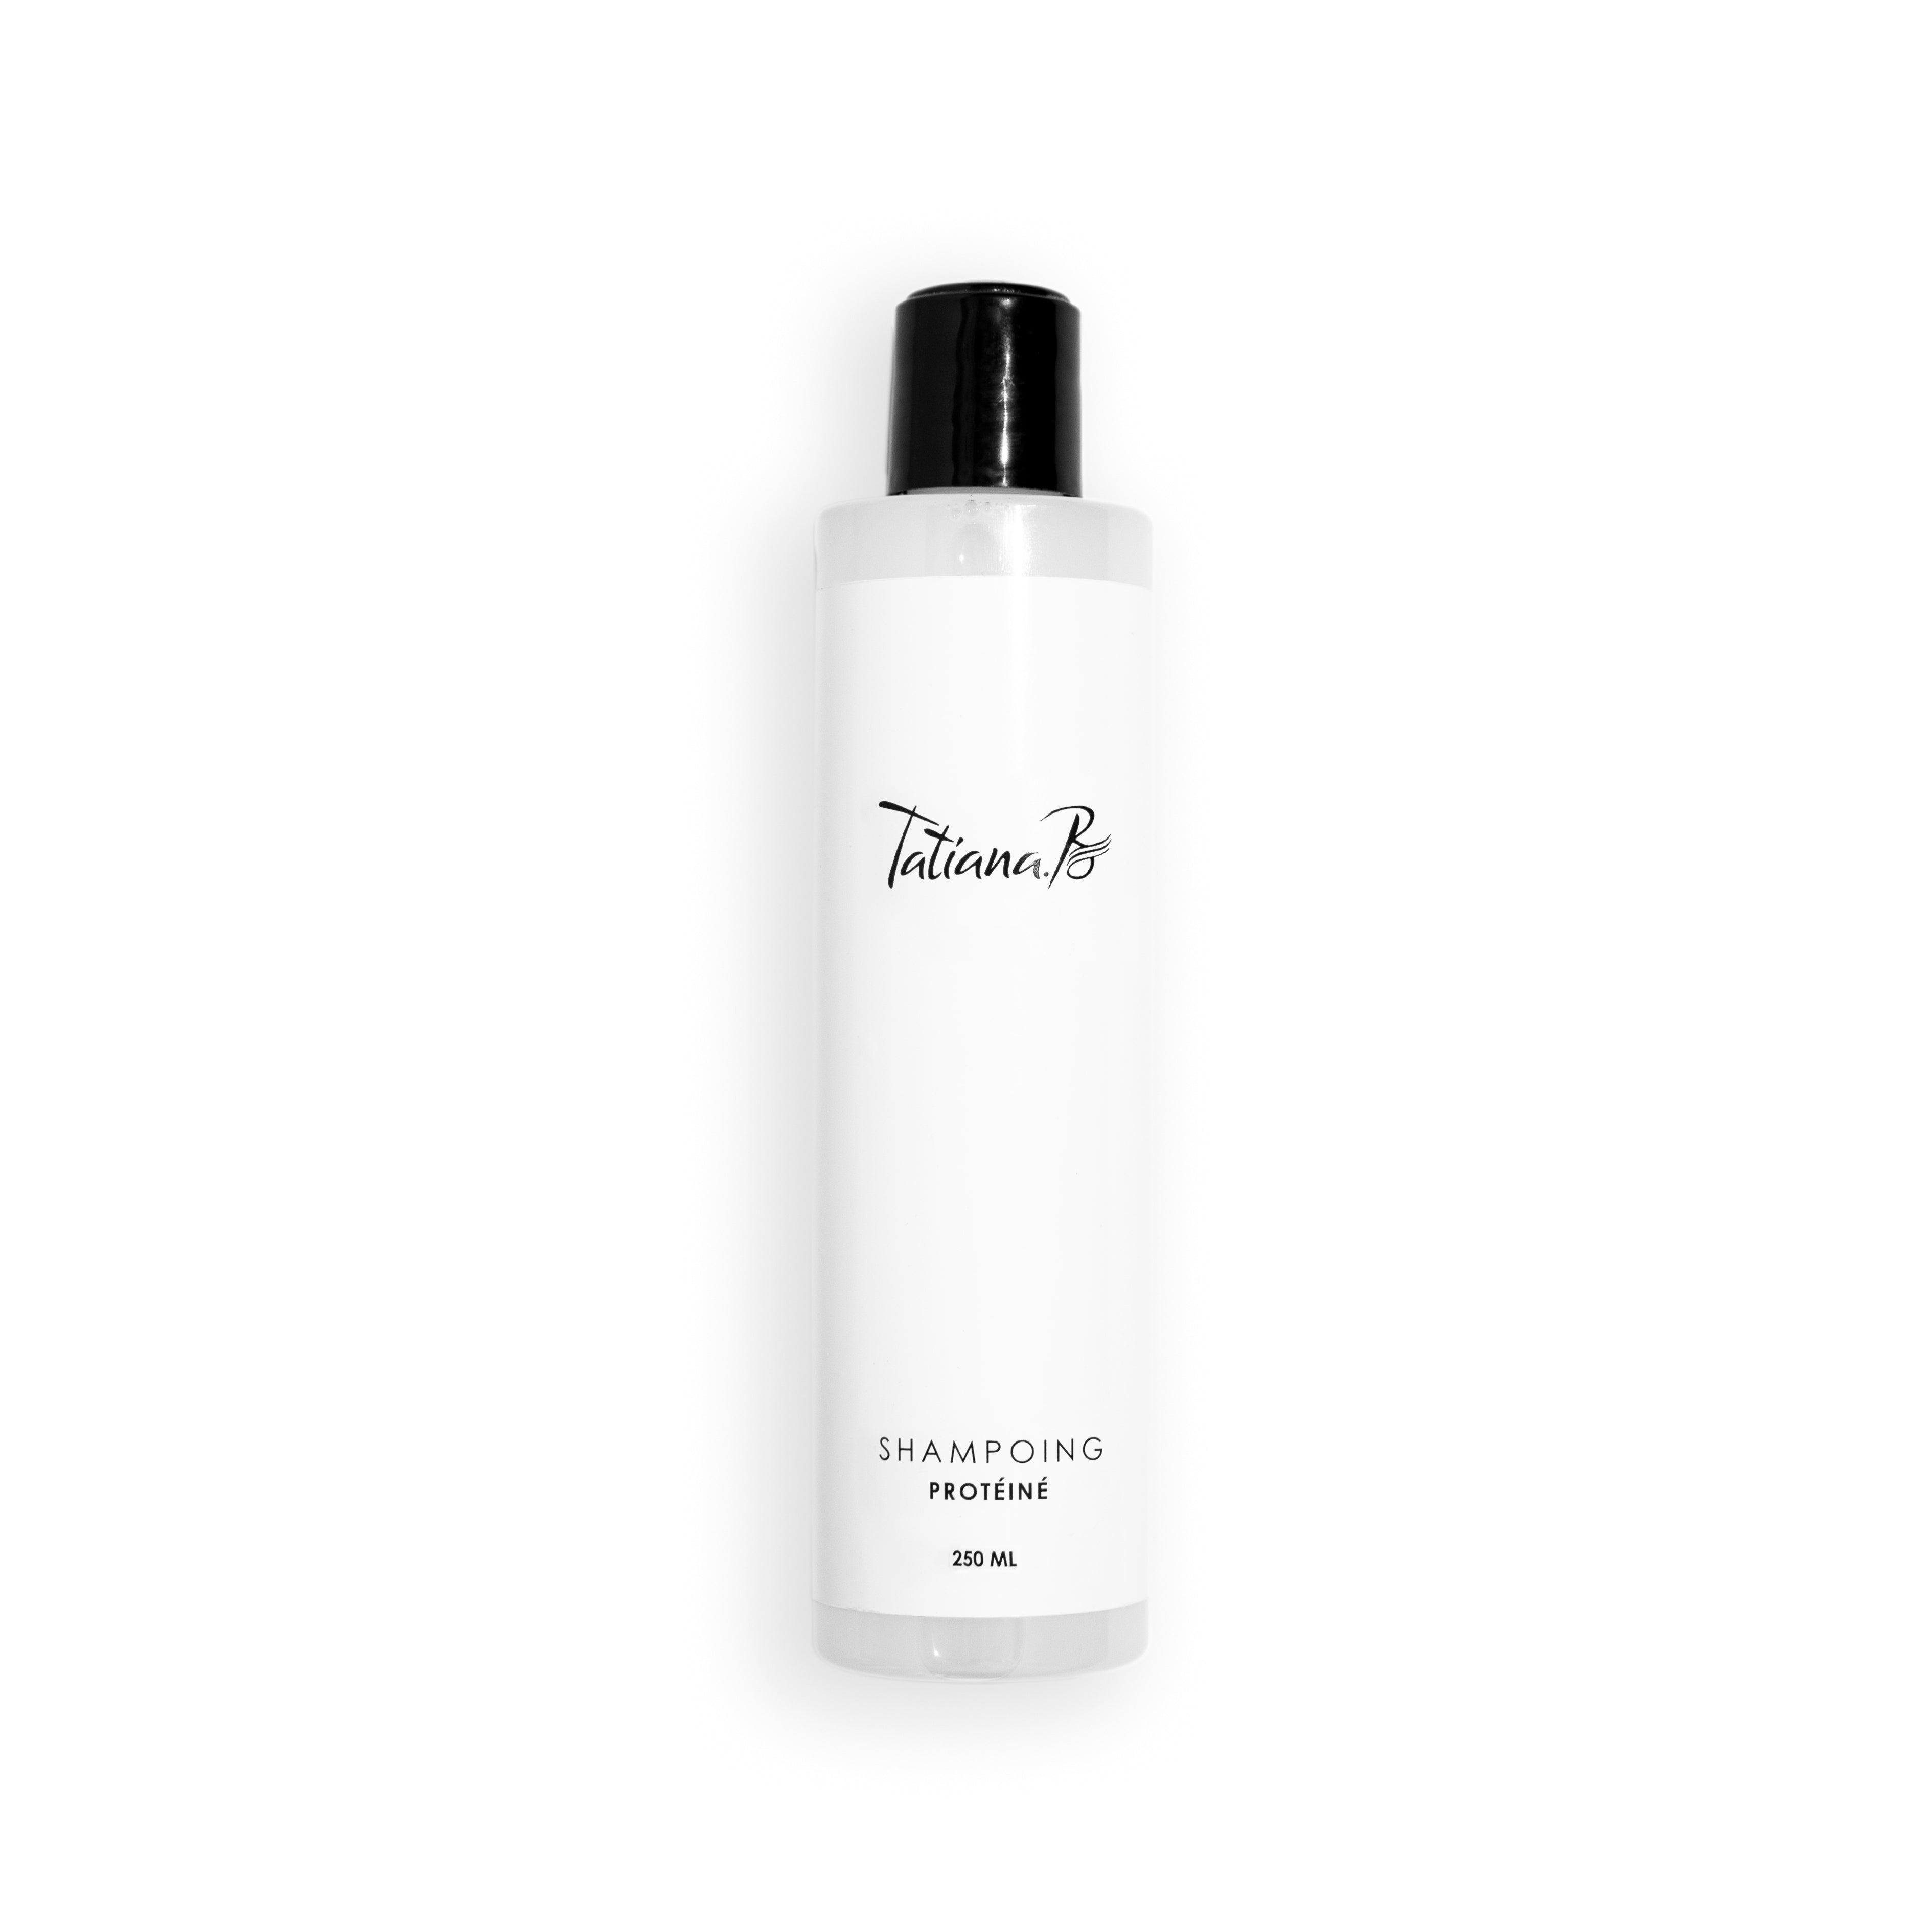 SHAMPOING NOURRISSANT PROTEINÉ